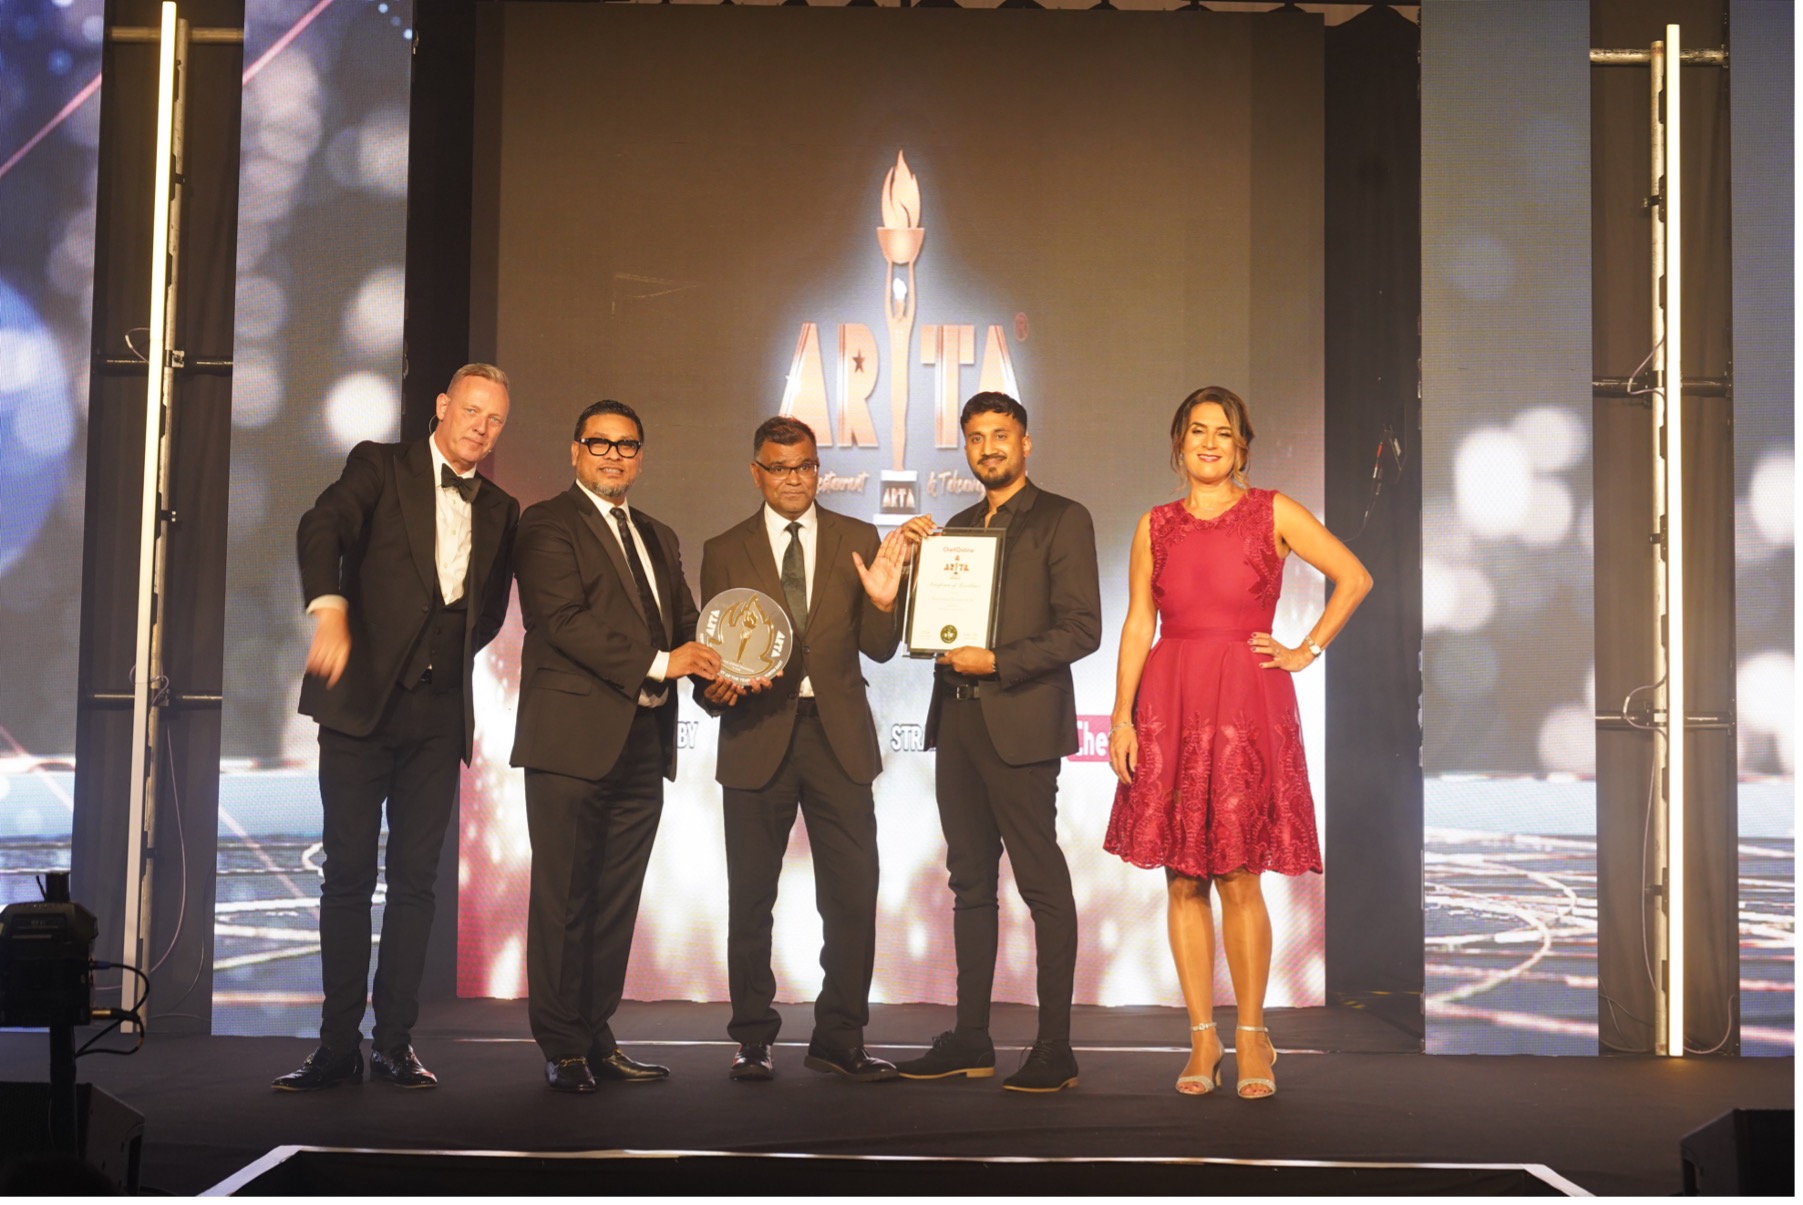  Raval Indian Brasserie & Bar from Newcastle Upon Tyne Won North East - Restaurant of the Year ARTA 2023 Award 